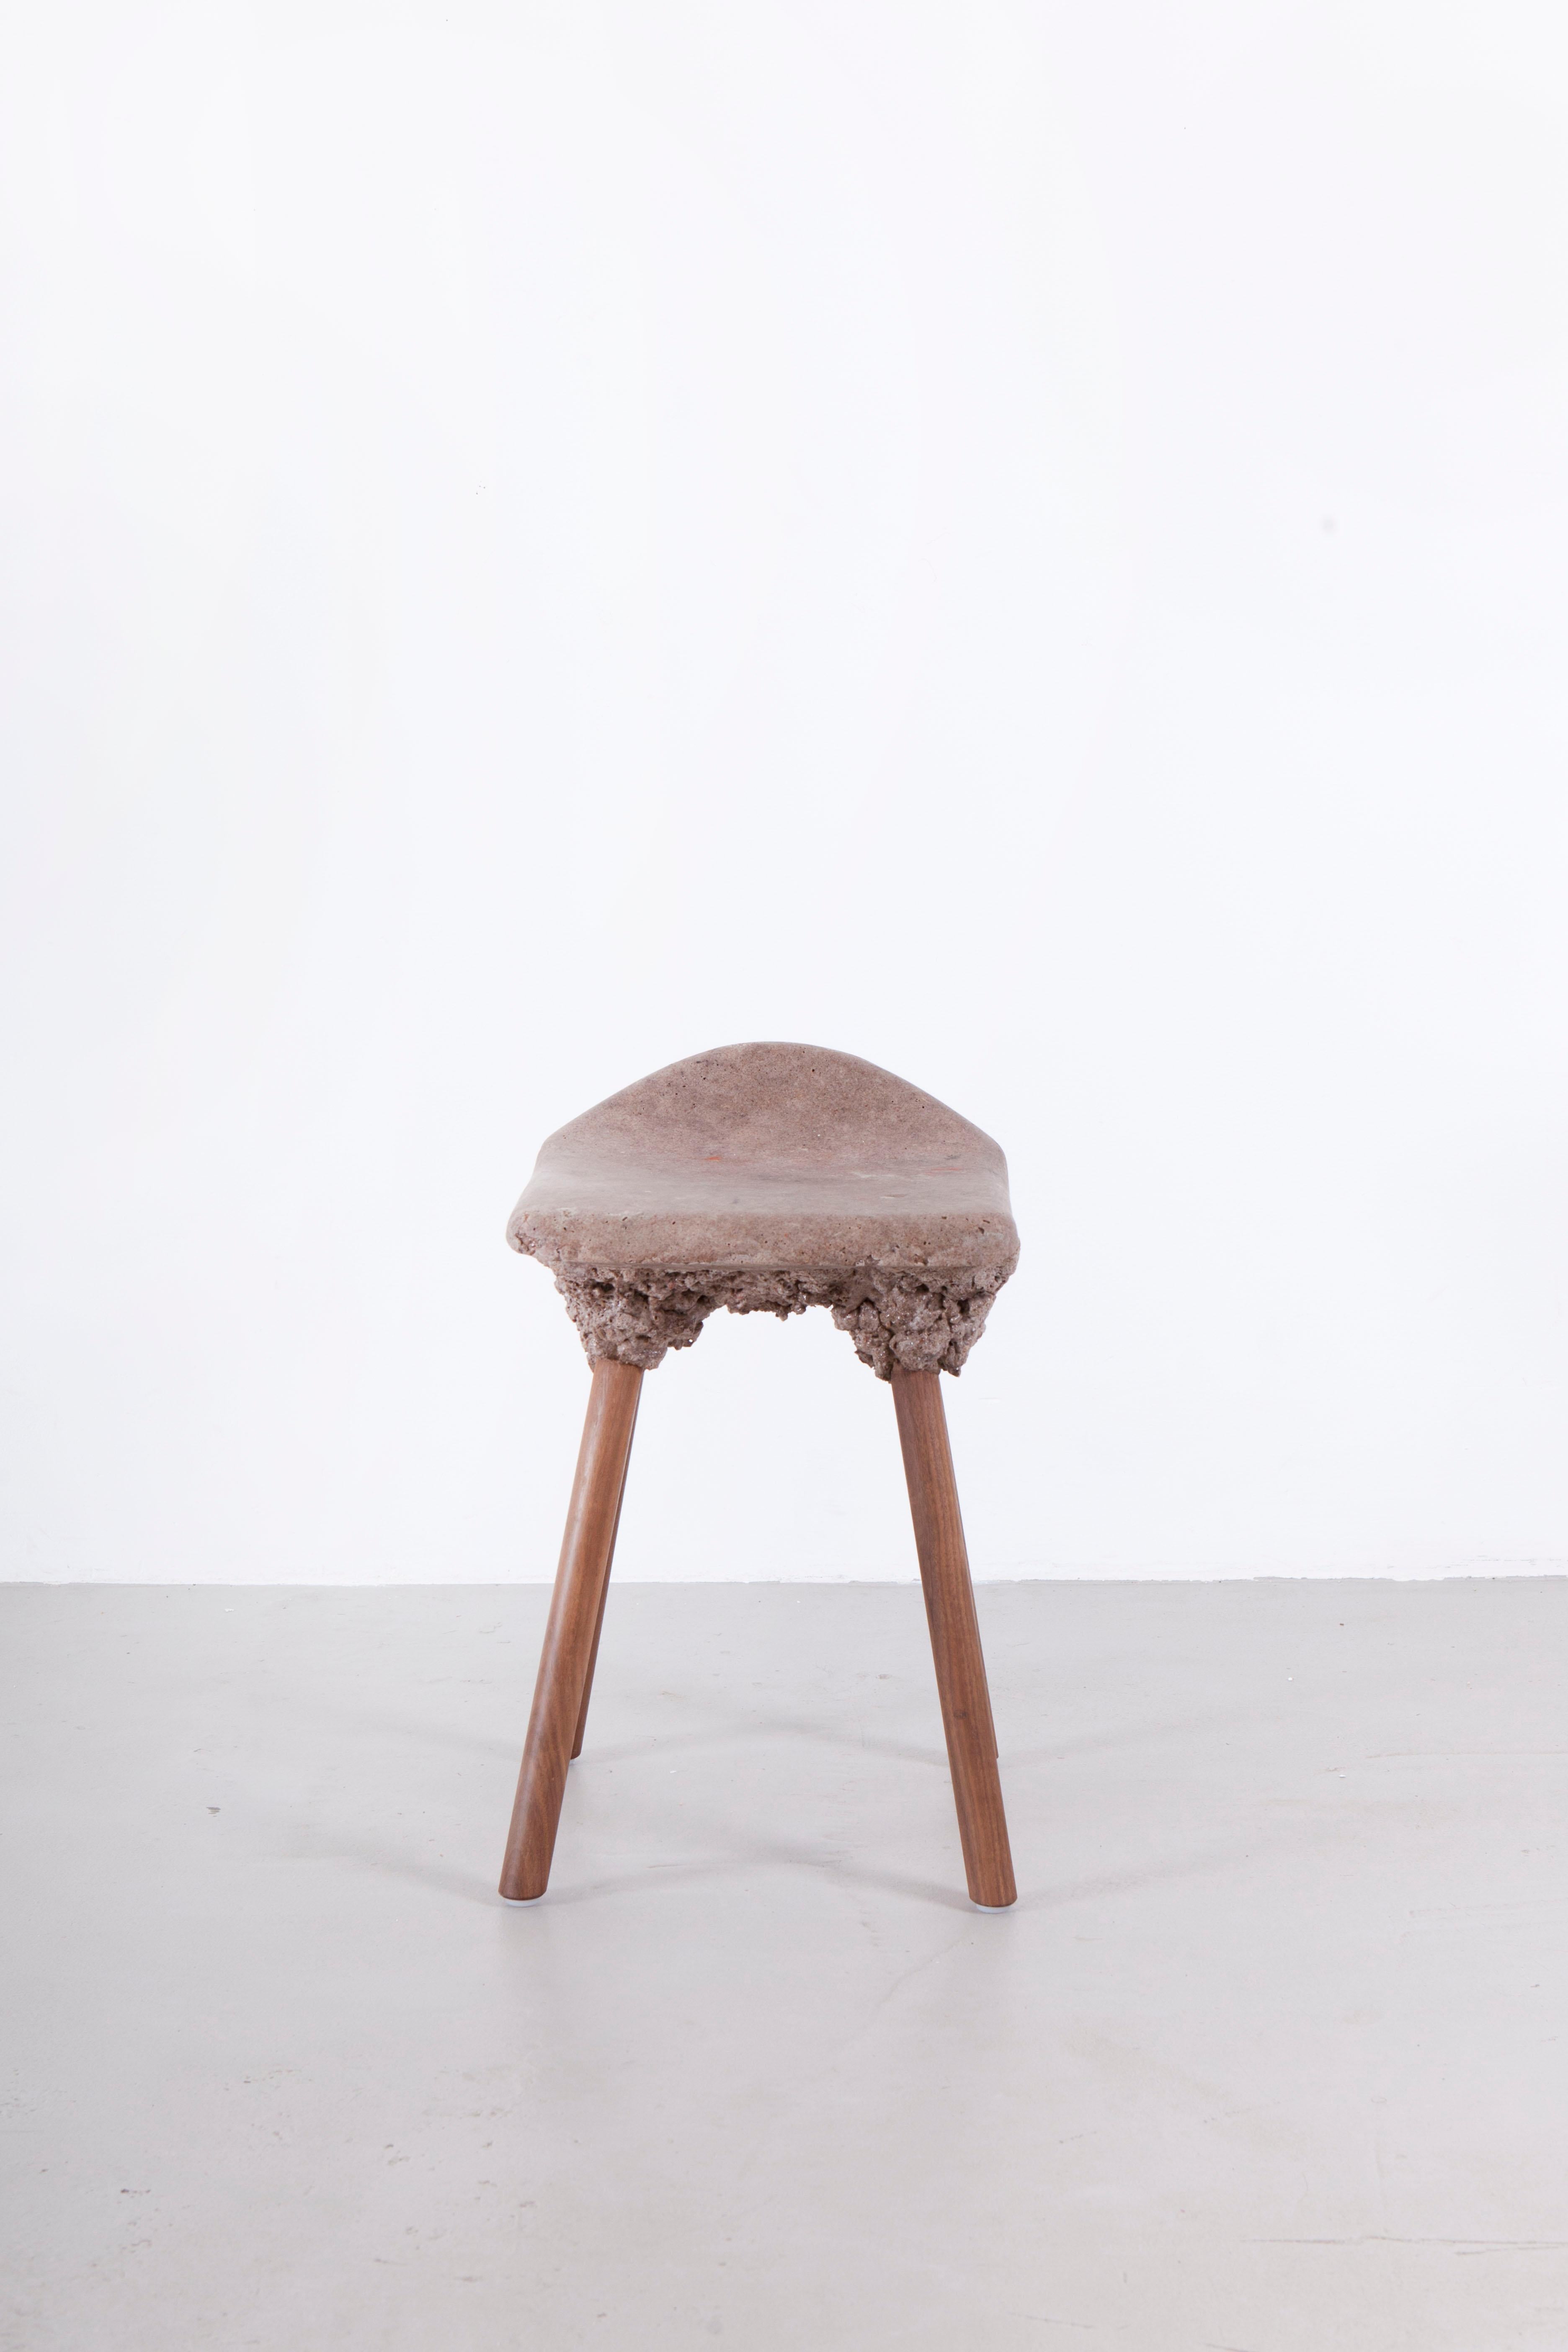 Understanding that there is 50% to 80% of timber wastage during normal manufacture, Marjan van Aubel and James Shaw incorporated waste shavings into design chairs and stools using bio resin. A curious chemical reaction occurs when it is mixed with